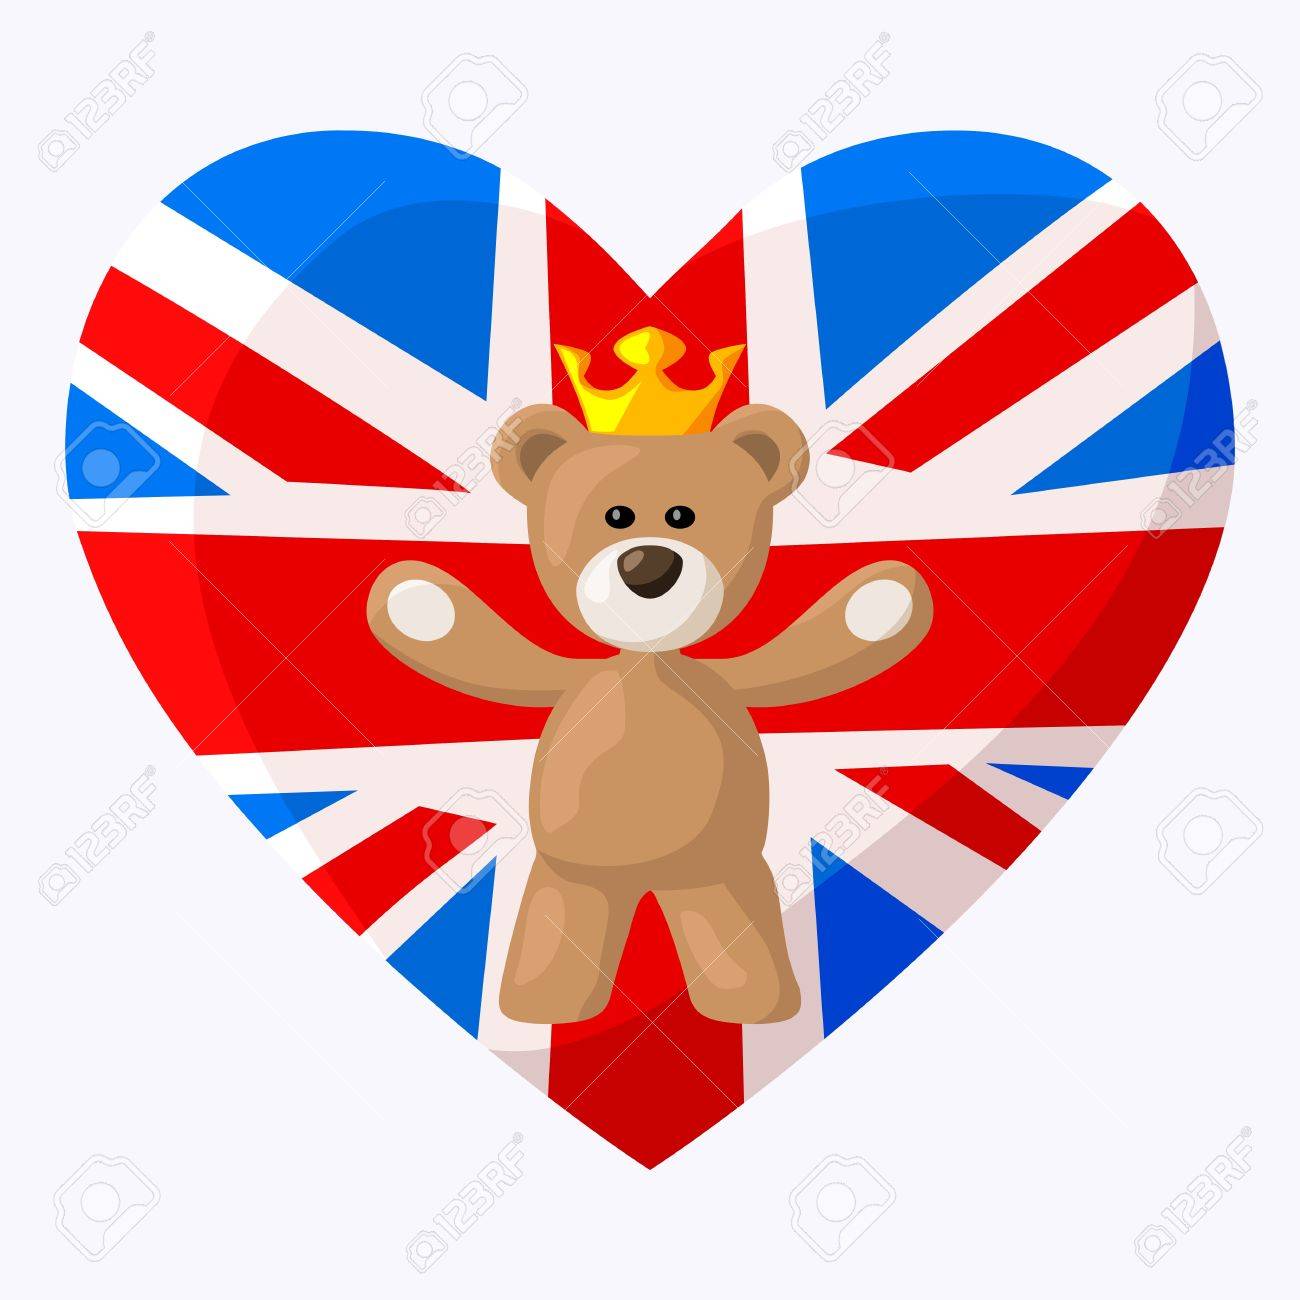 21307848-Teddy-Bear-with-crown-and-heart-with-British-flag-on-the-background-on-occasion-of-the-birth-of-the--Stock-Vector.jpg